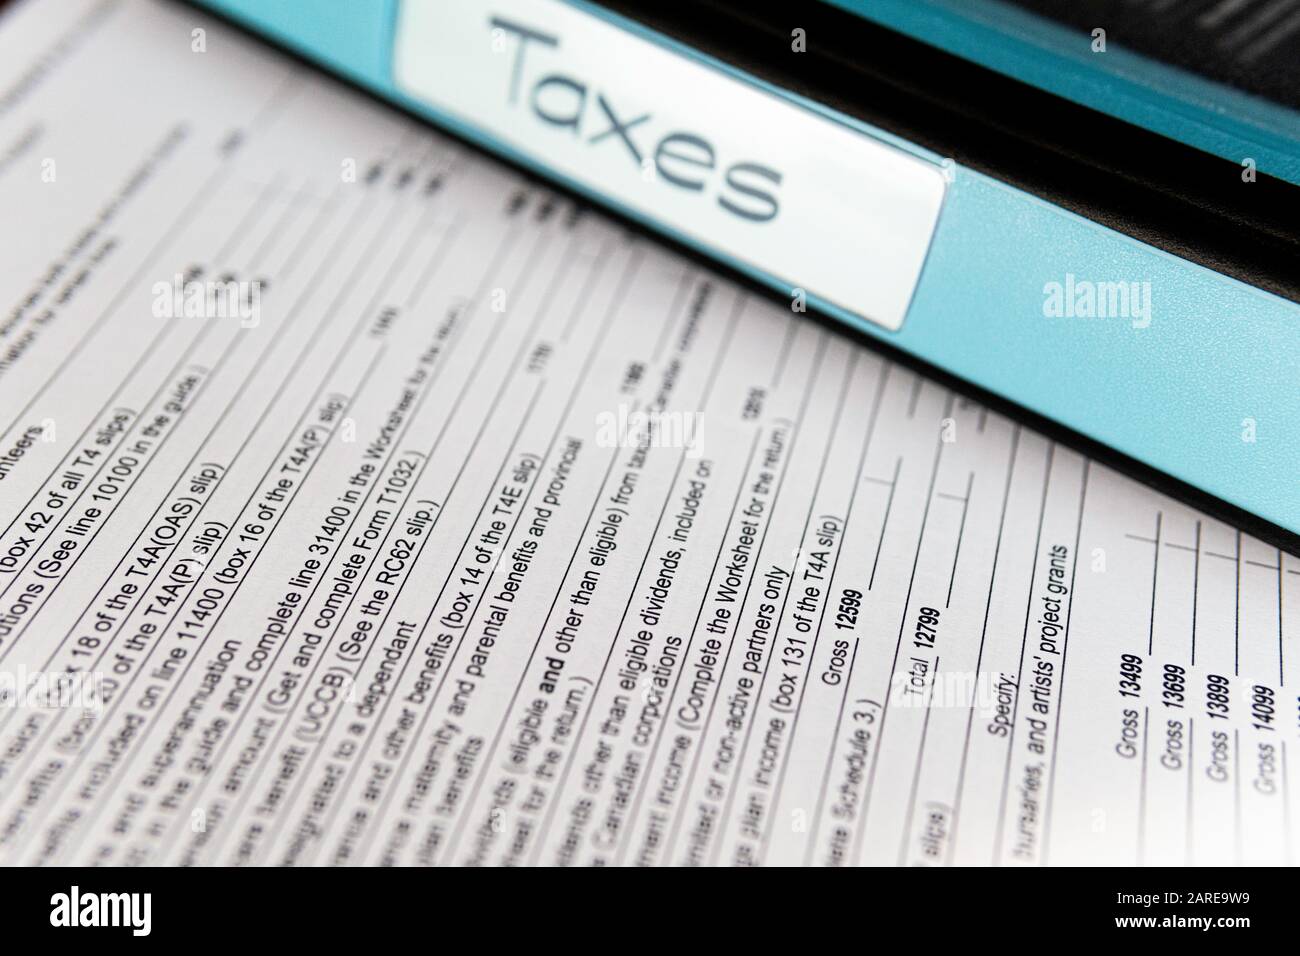 New Canada Revenue Agency Tax Forms Stock Photo